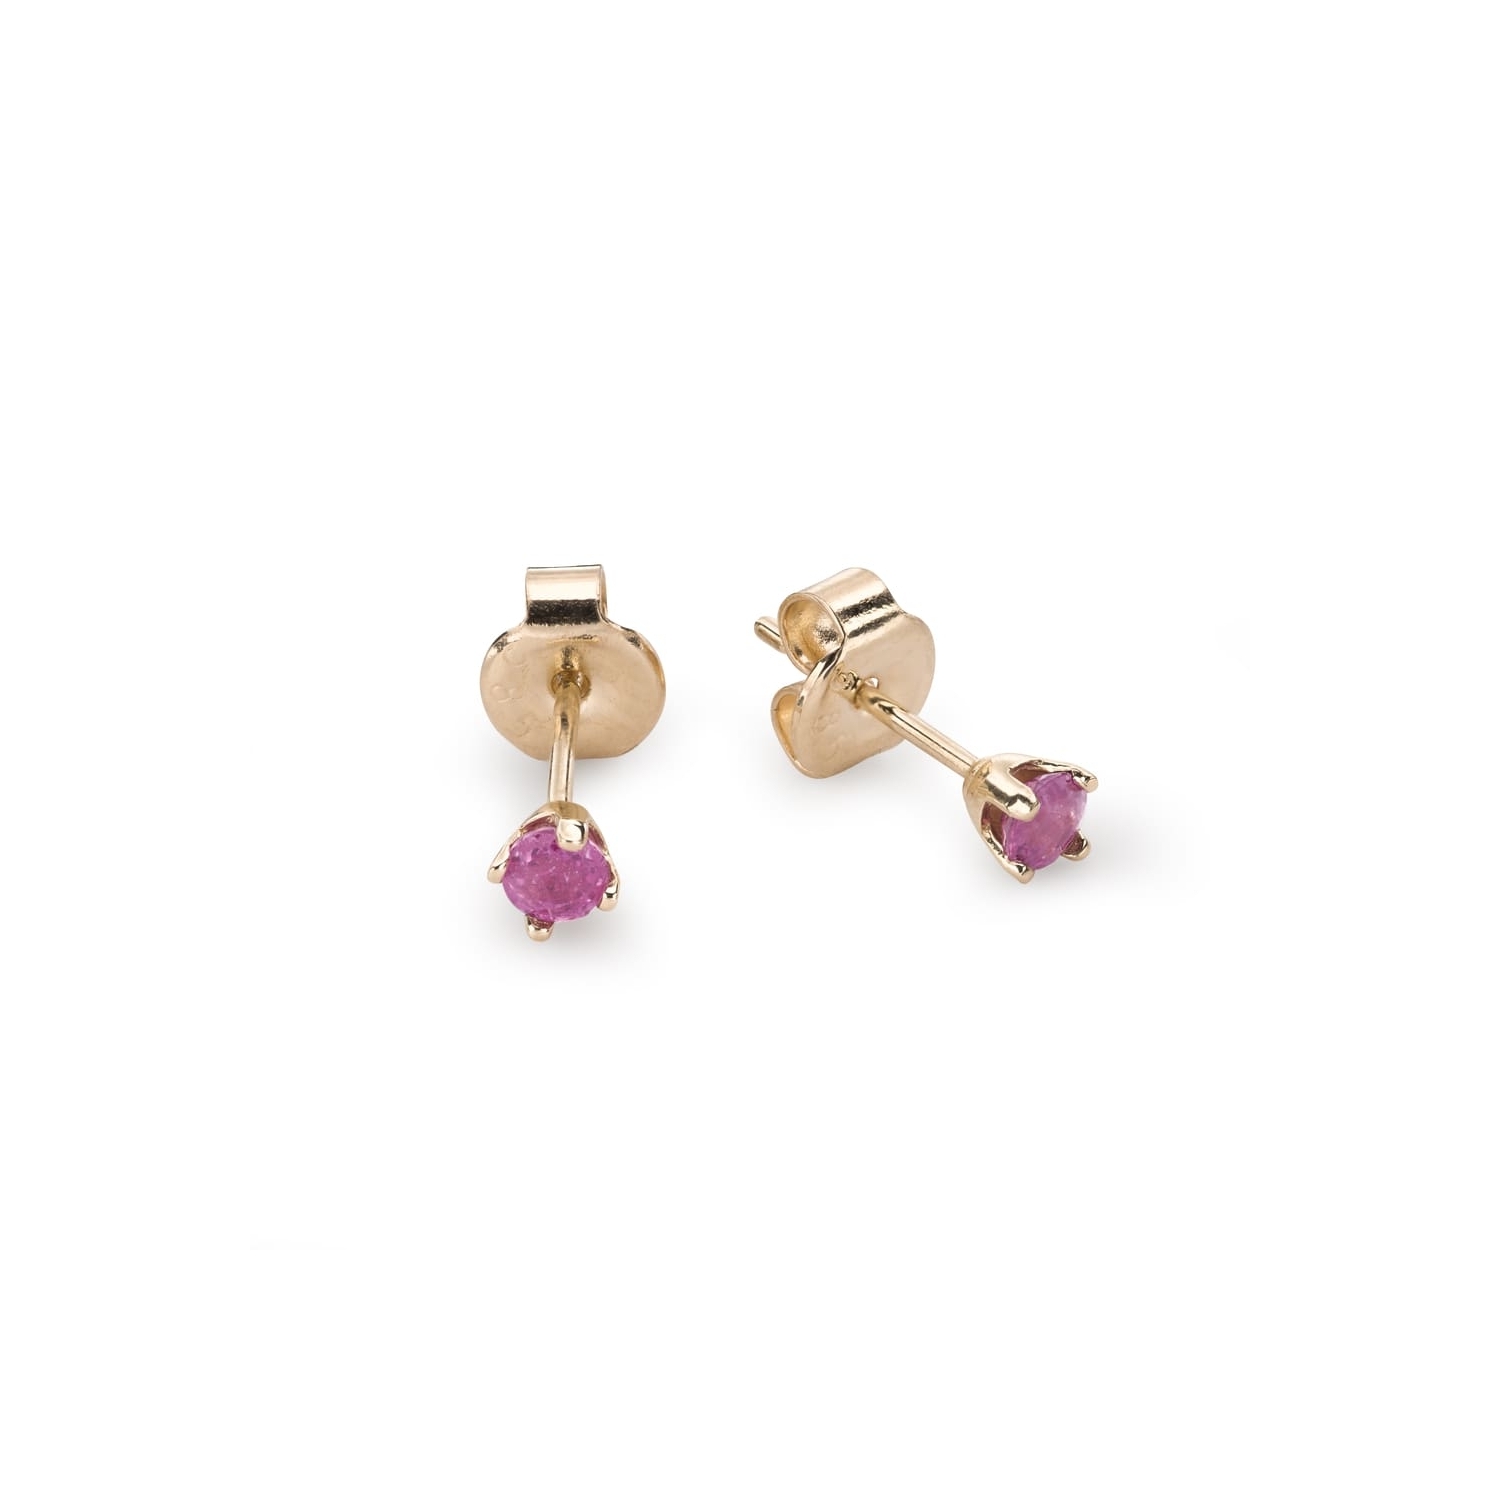 Gold earrings with gemstones "Colors 70"